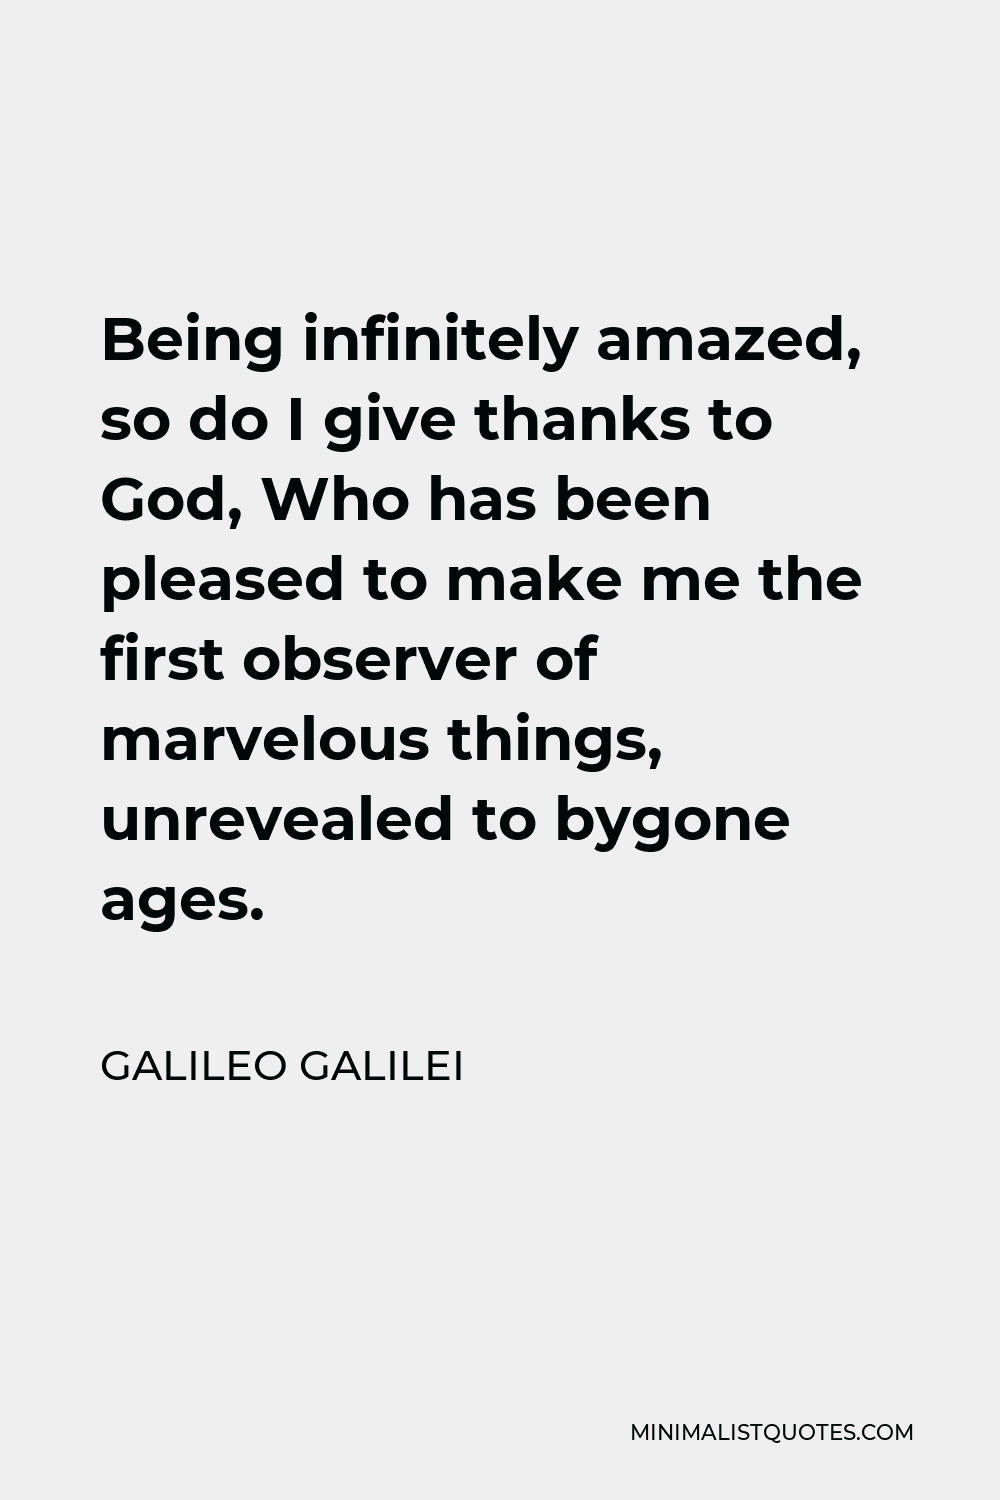 Galileo Galilei Quote - Being infinitely amazed, so do I give thanks to God, Who has been pleased to make me the first observer of marvelous things, unrevealed to bygone ages.